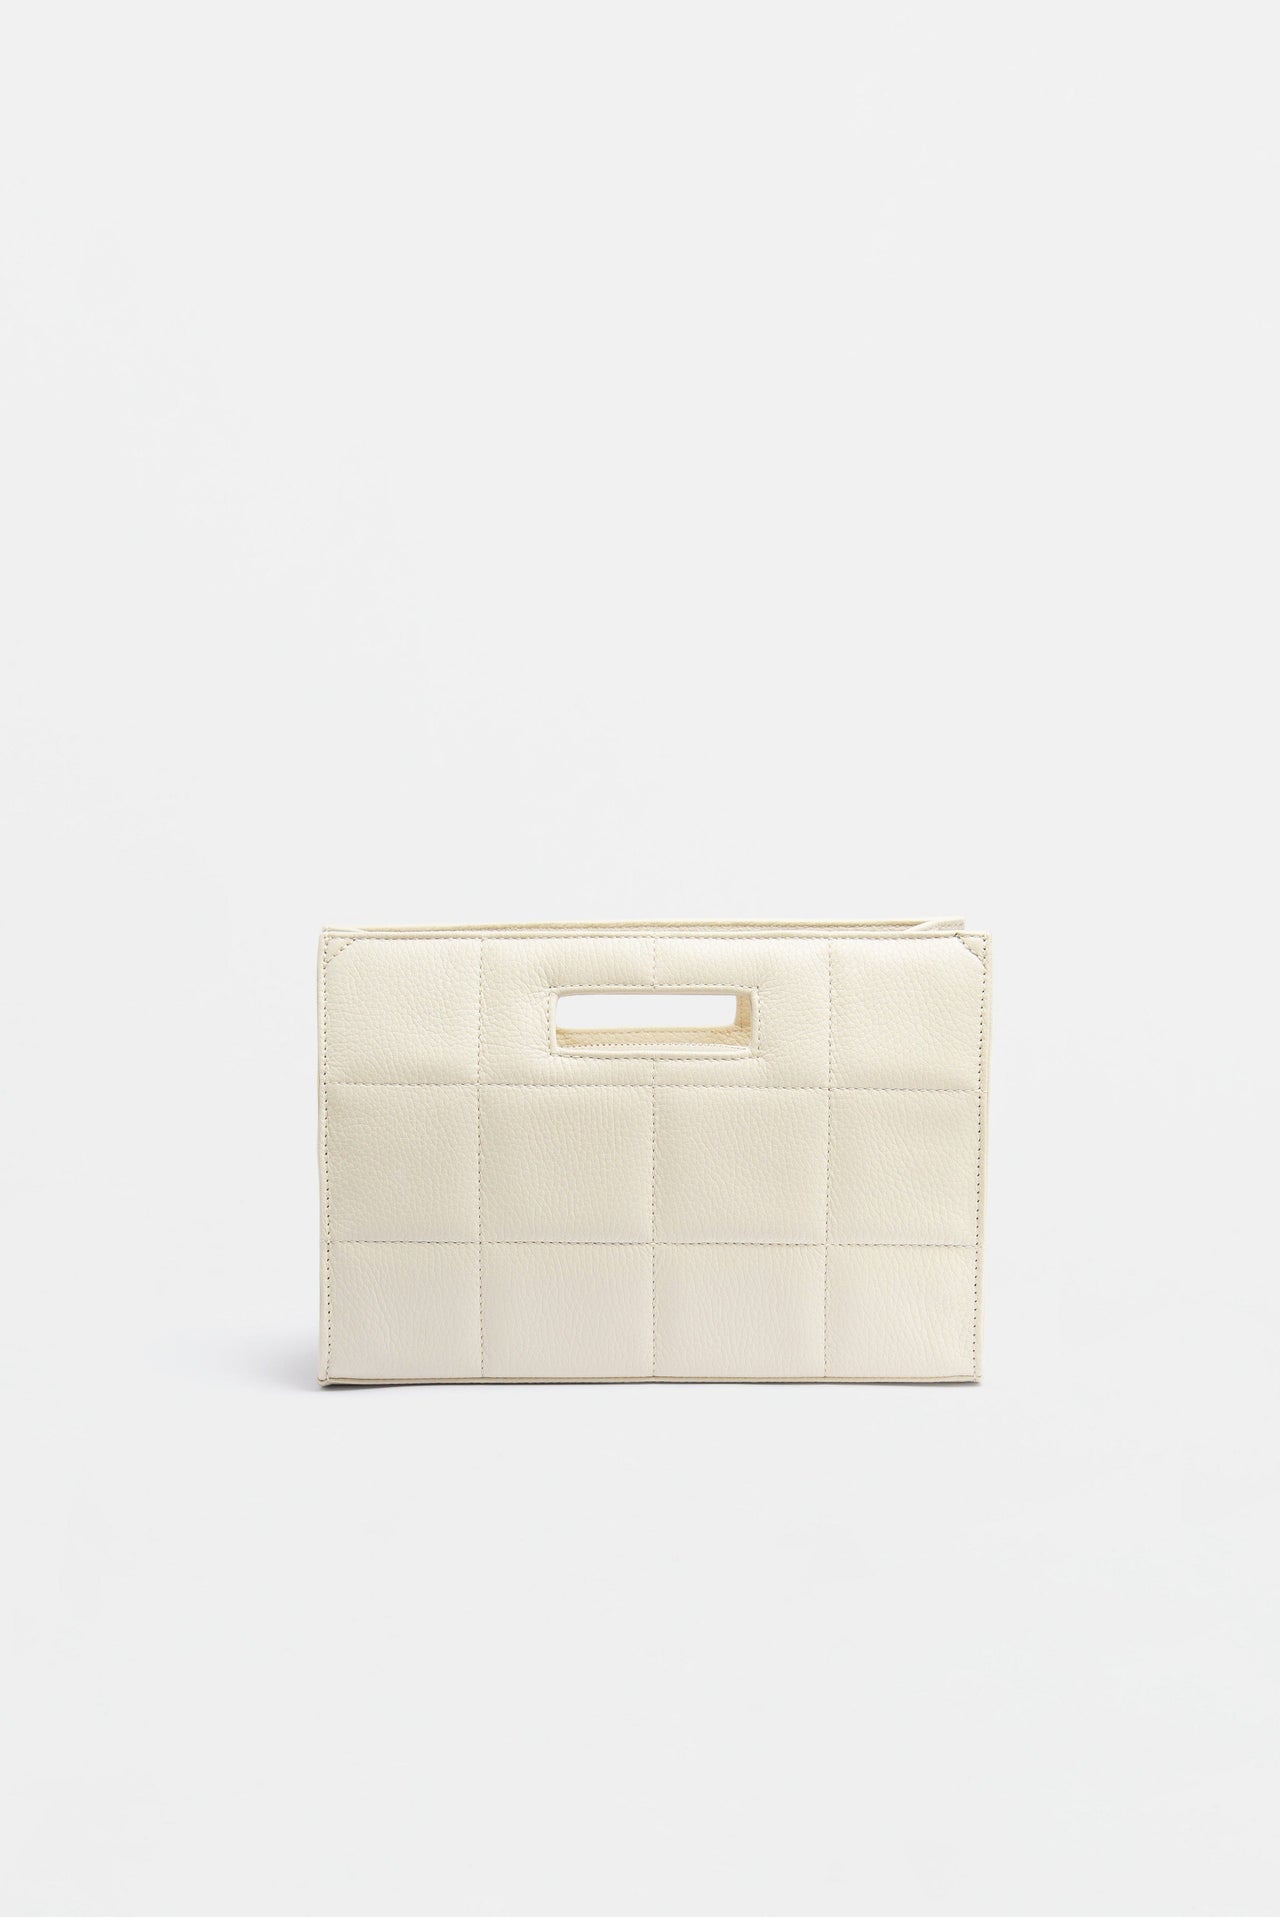 The QUILTED BAG SMALL Oat - JULIA SKERGETH